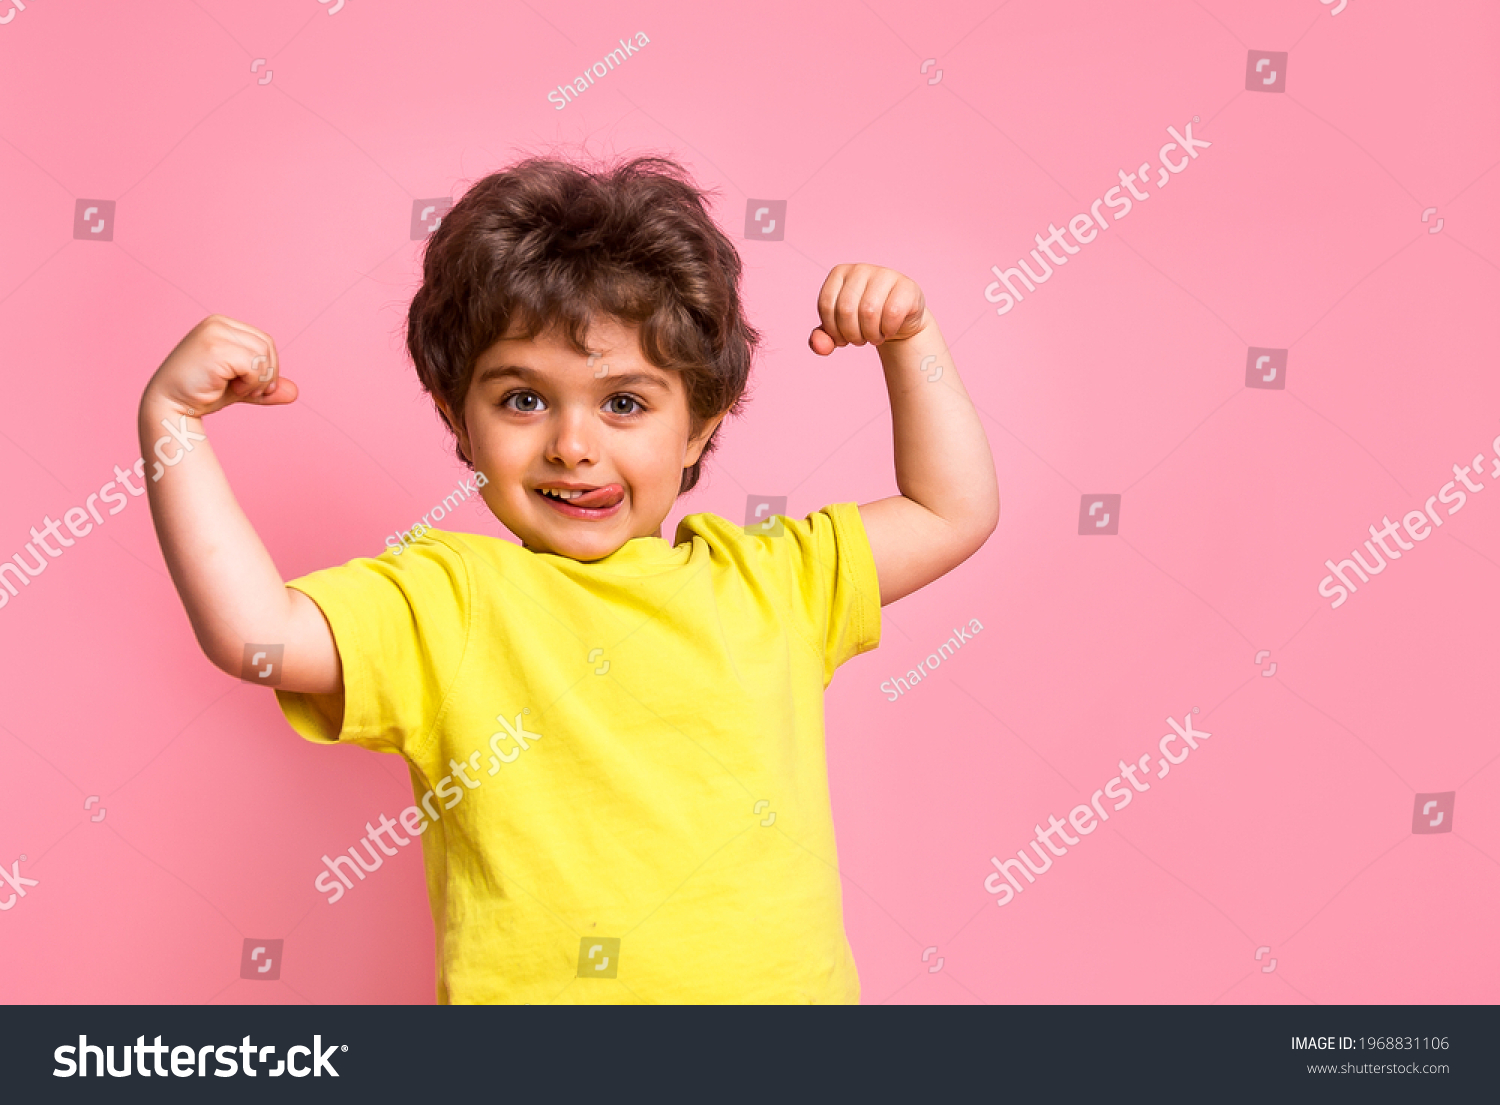 Portrait of little kid boy isolated over pink background showing tongue. Funny little power super hero kid showing muscles. Strength, confidence or defense from bullying. Kindergarten or school kid #1968831106